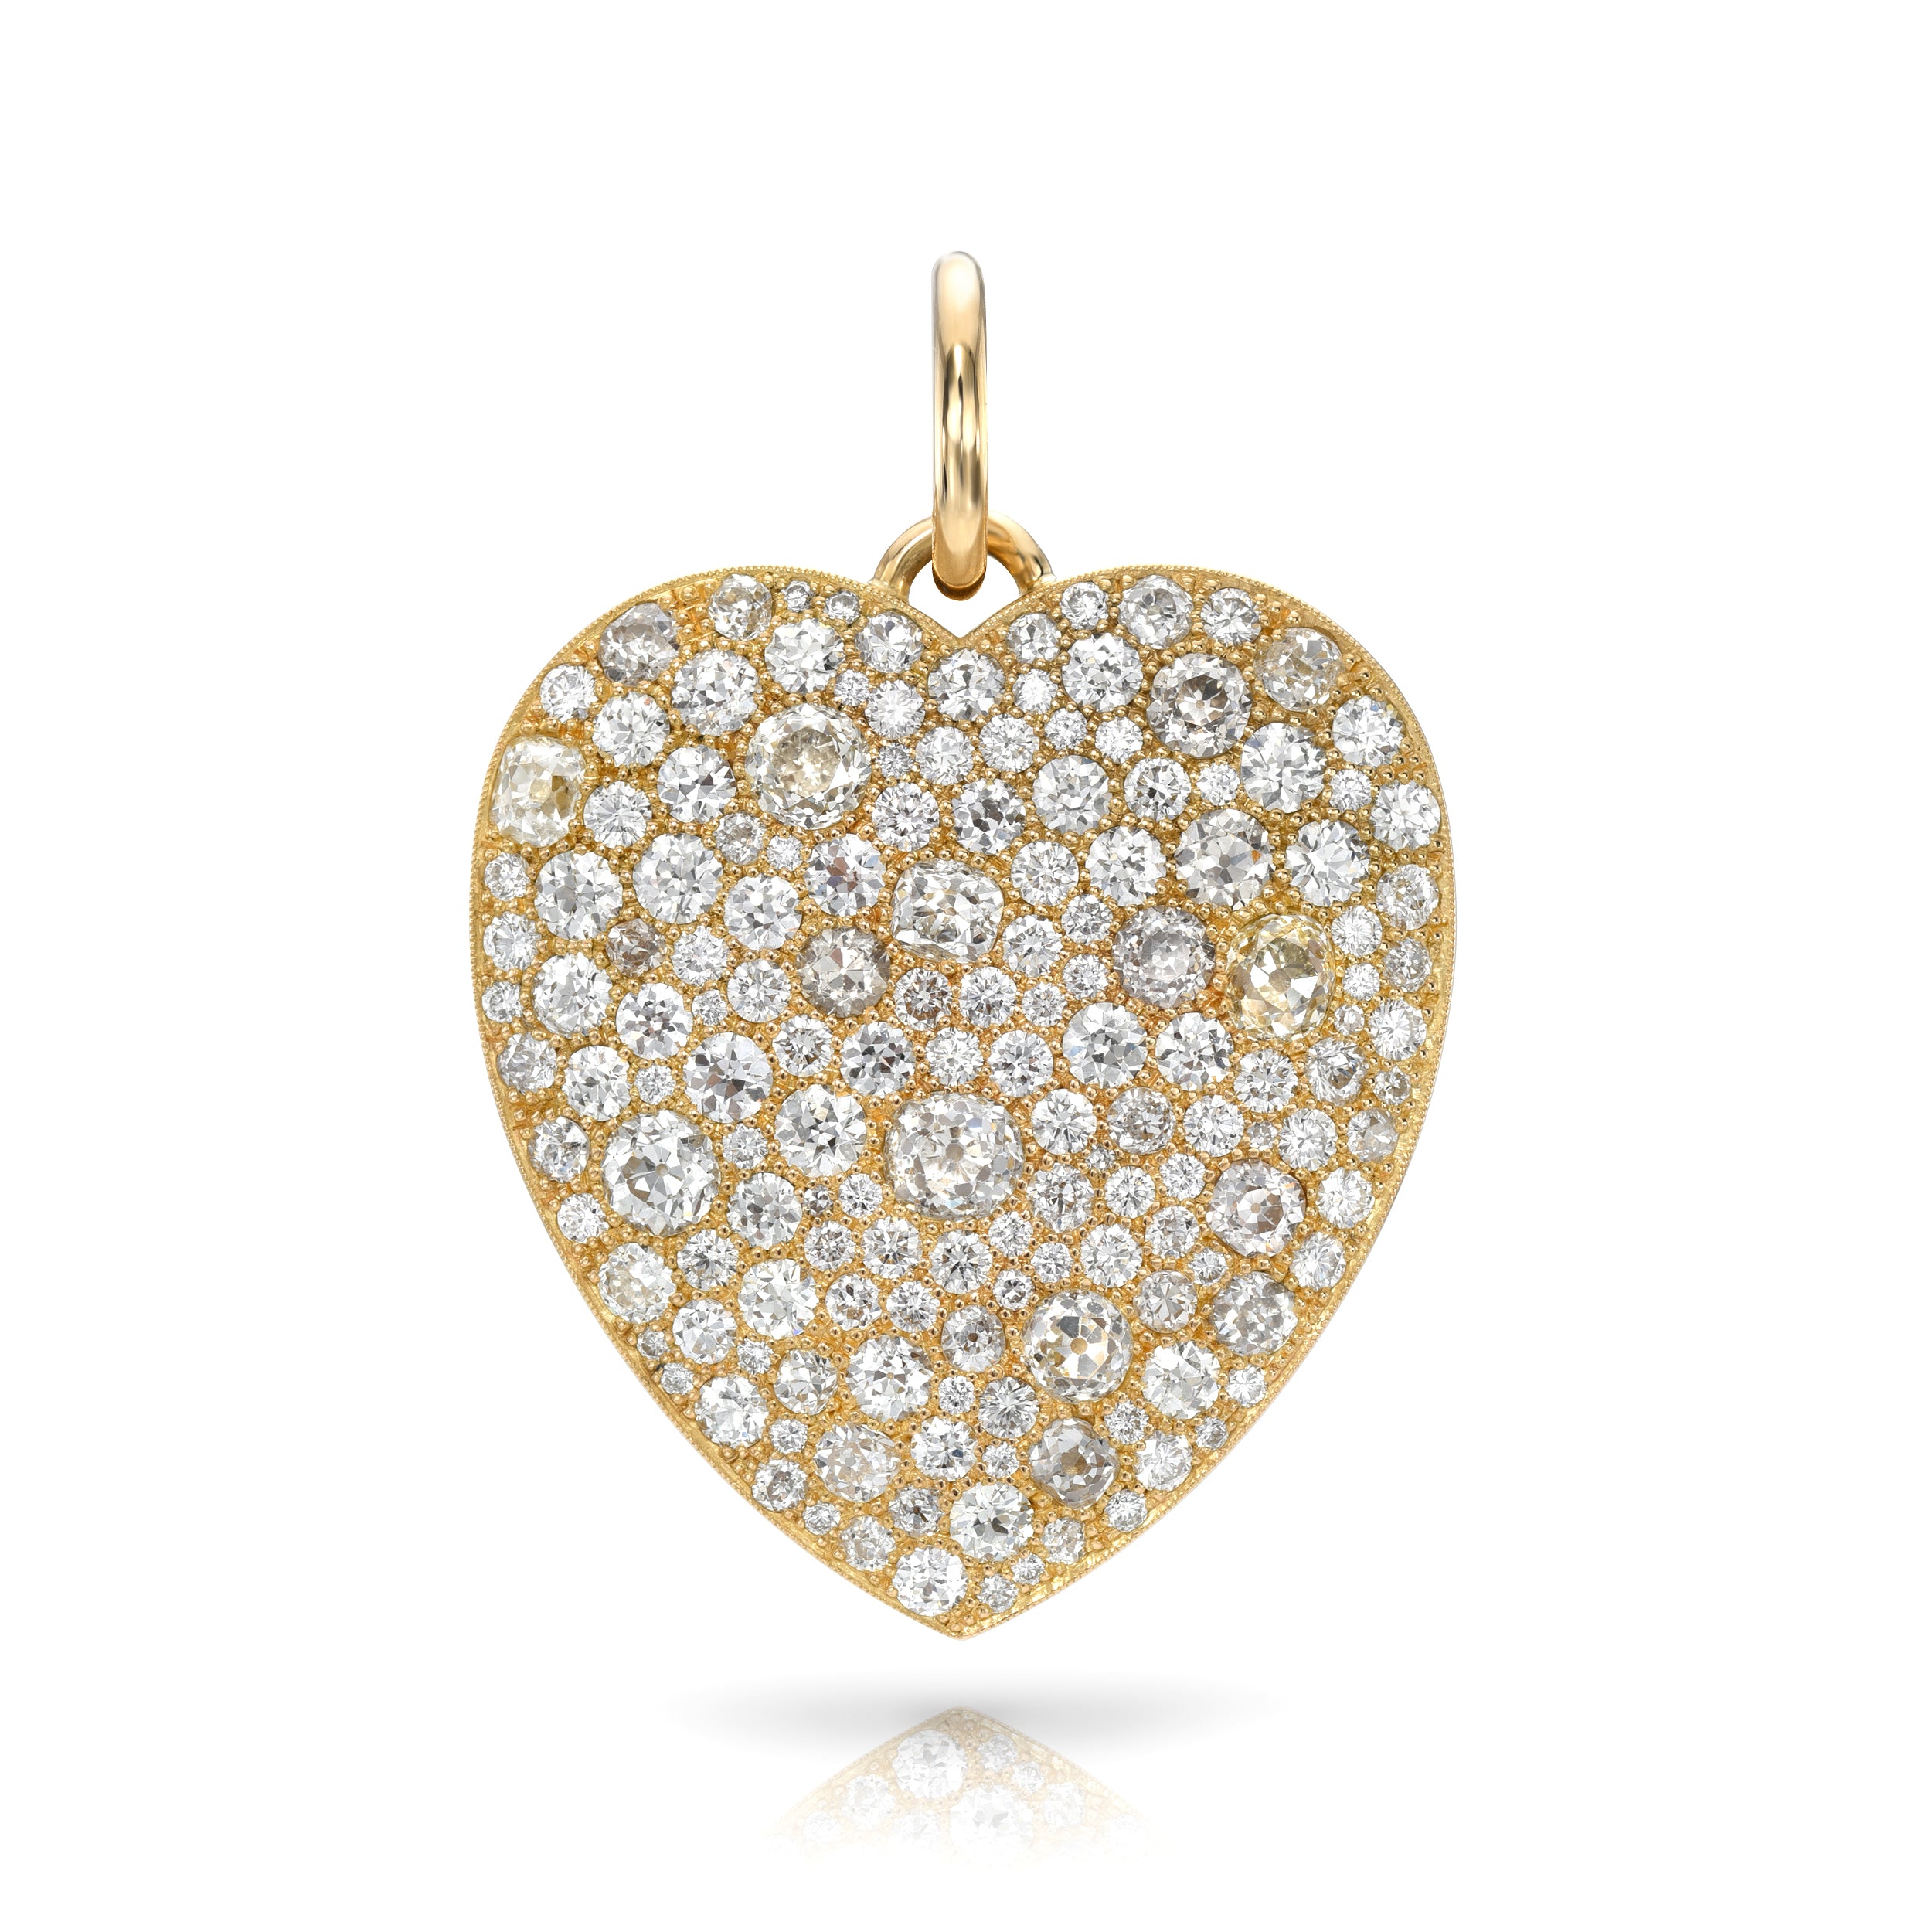 SINGLE STONE EXTRA LARGE COBBLESTONE HEART PENDANT featuring 9.94ctw varying old cut and round brilliant cut diamonds set in a handcrafted 18K yellow gold heart shaped pendant.